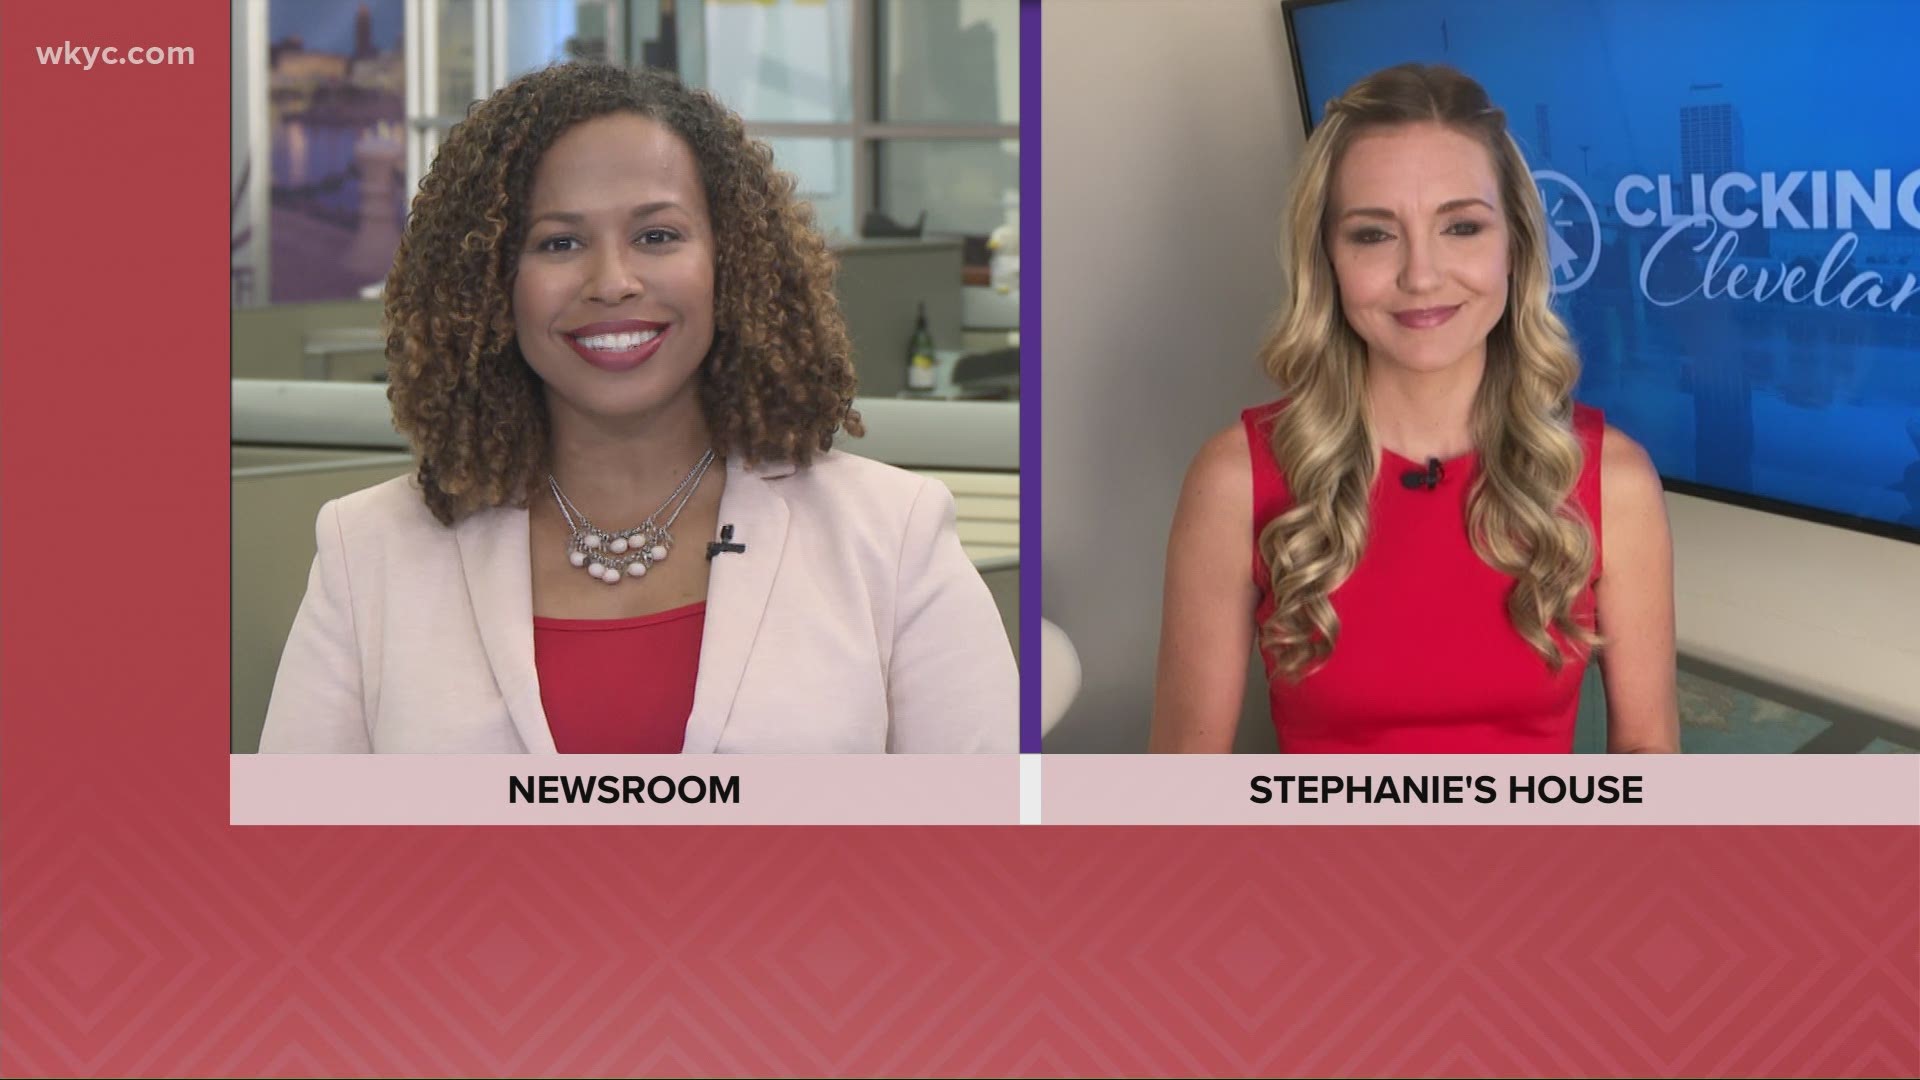 3News digital anchor Stephanie Haney has the top trending stories from WKYC.com in 'Clicking in Cleveland' on 'What's New'